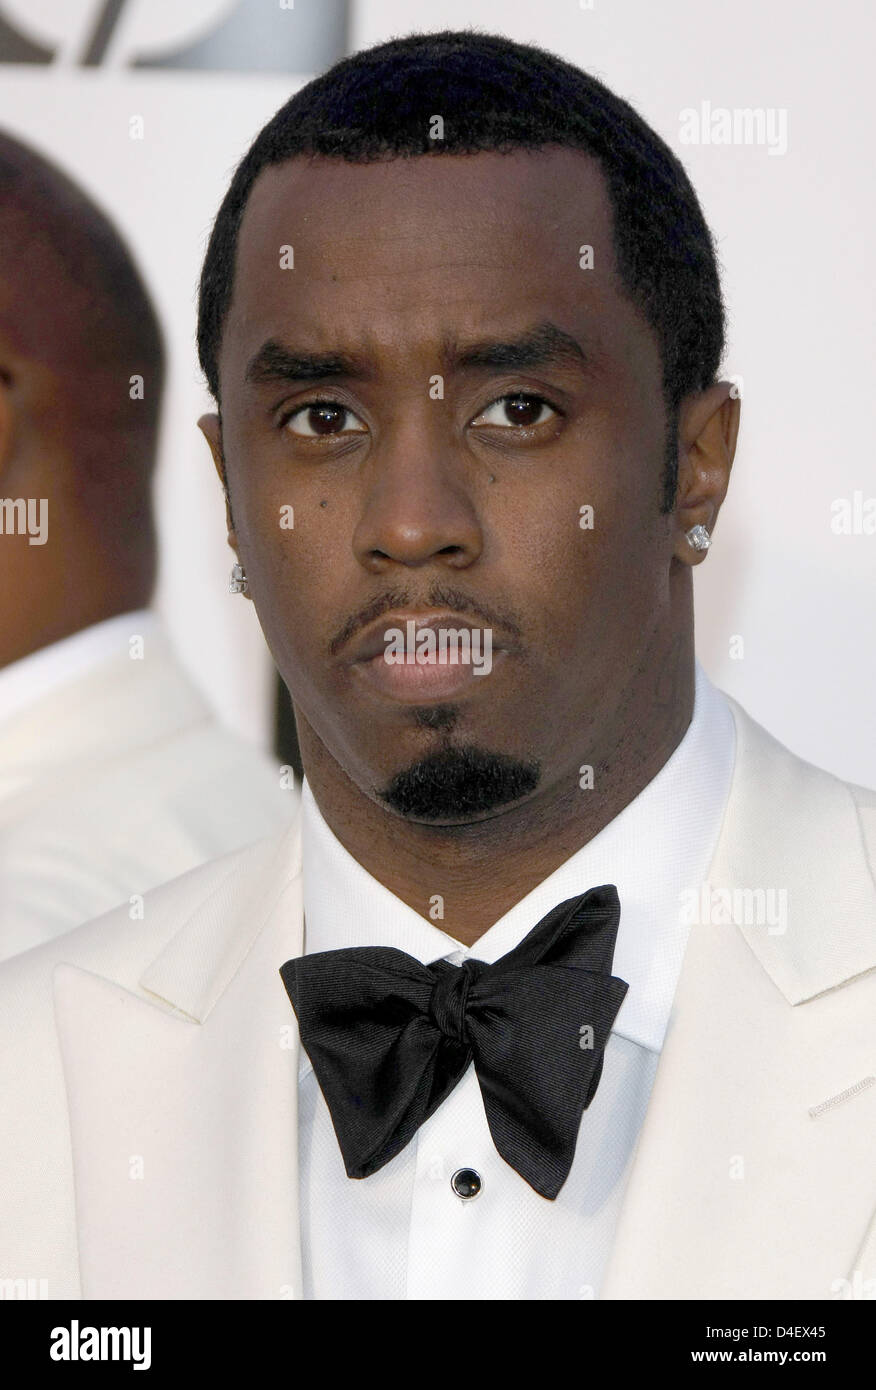 US rap mogul Sean Combs aka P.Diddy arrives for the amfAR Cinema Against Aids Gala at the 2008 Cannes Film Festival near Cannes, France, 22 May 2008. Photo: Hubert Boesl Stock Photo